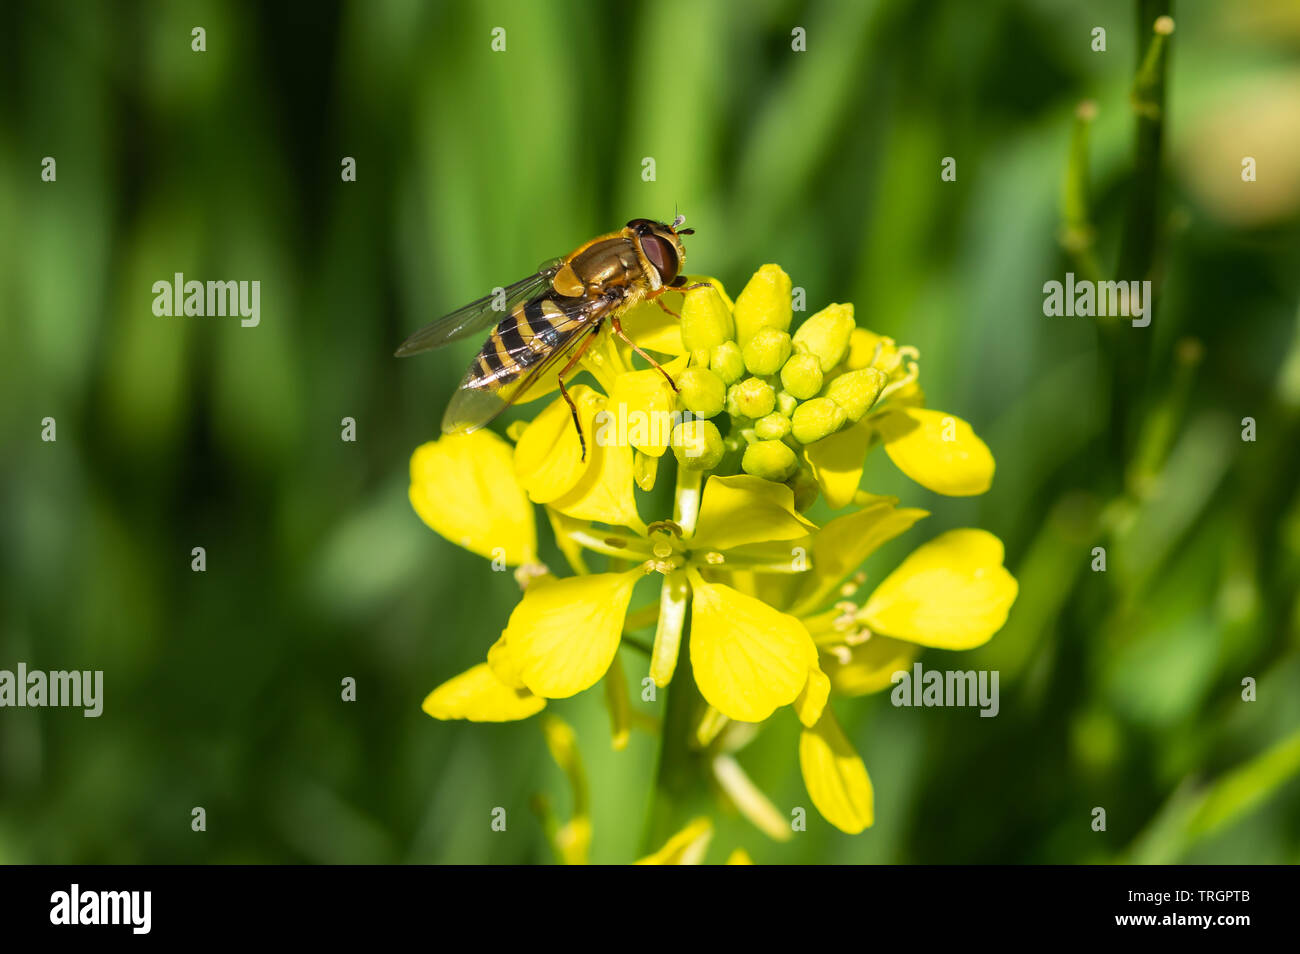 Hoverfly on rapeseed flower Stock Photo